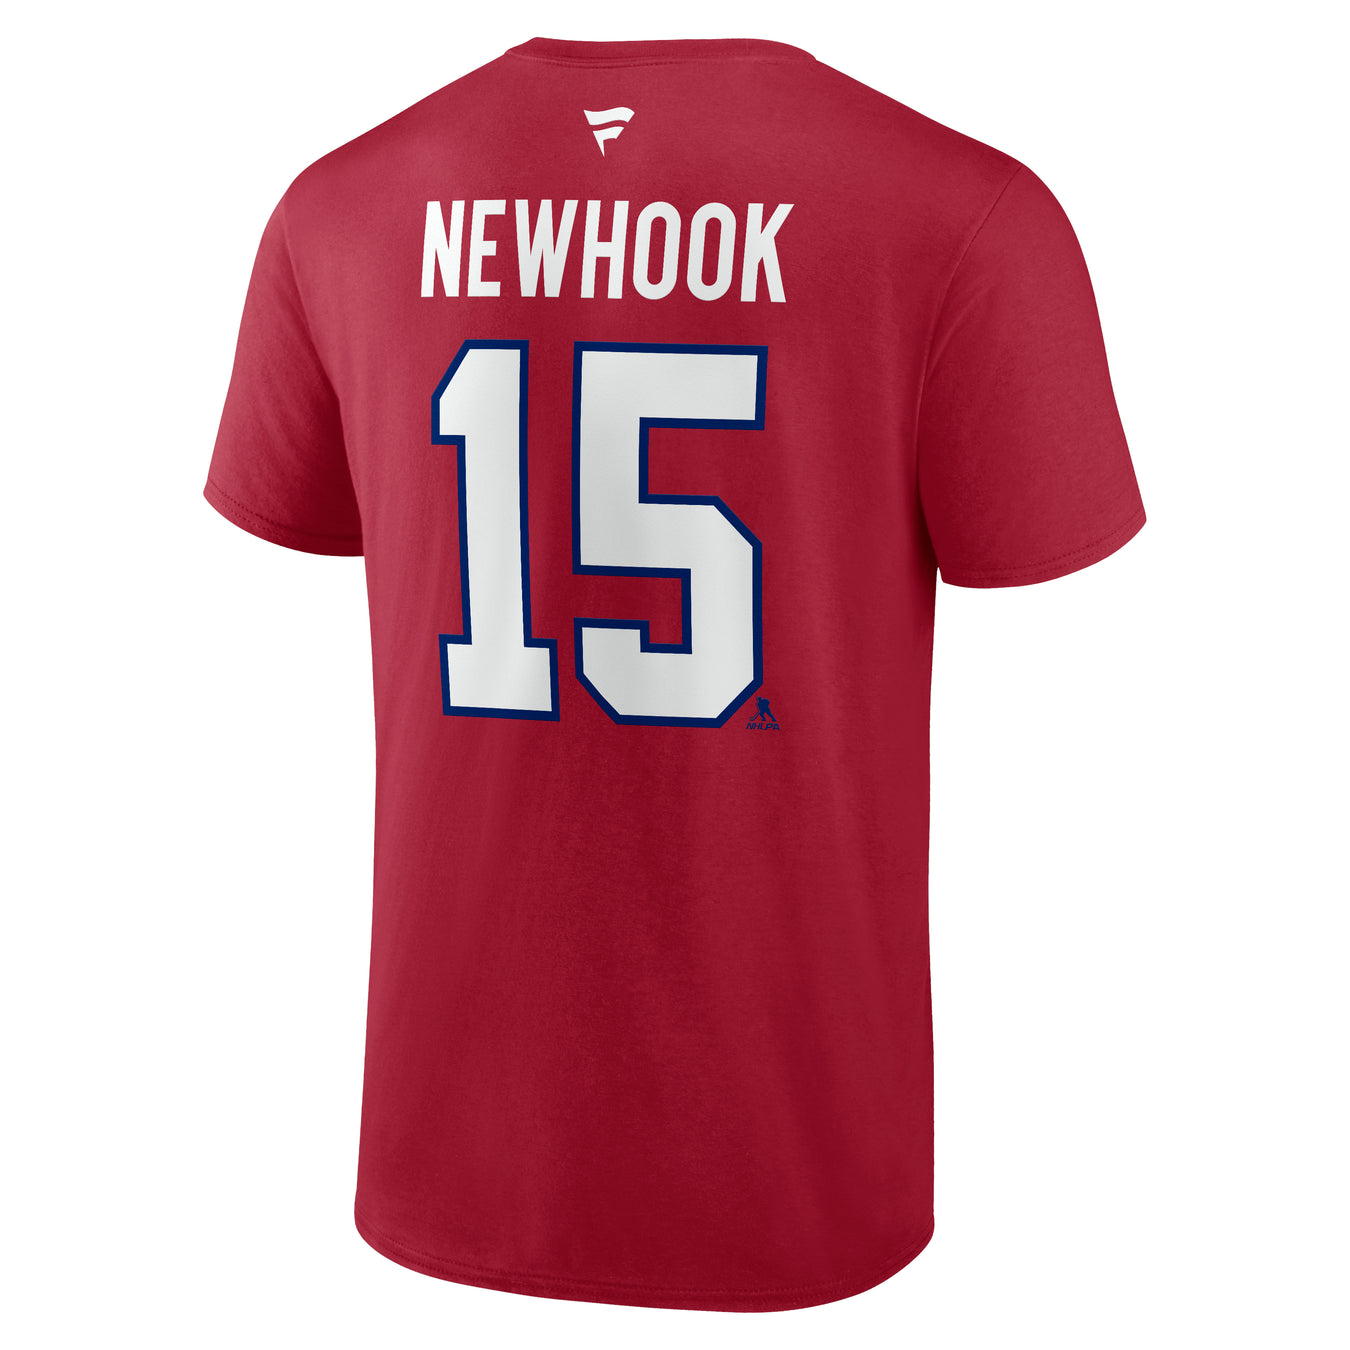 Alex Newhook NHL Jerseys, Apparel and Collectibles